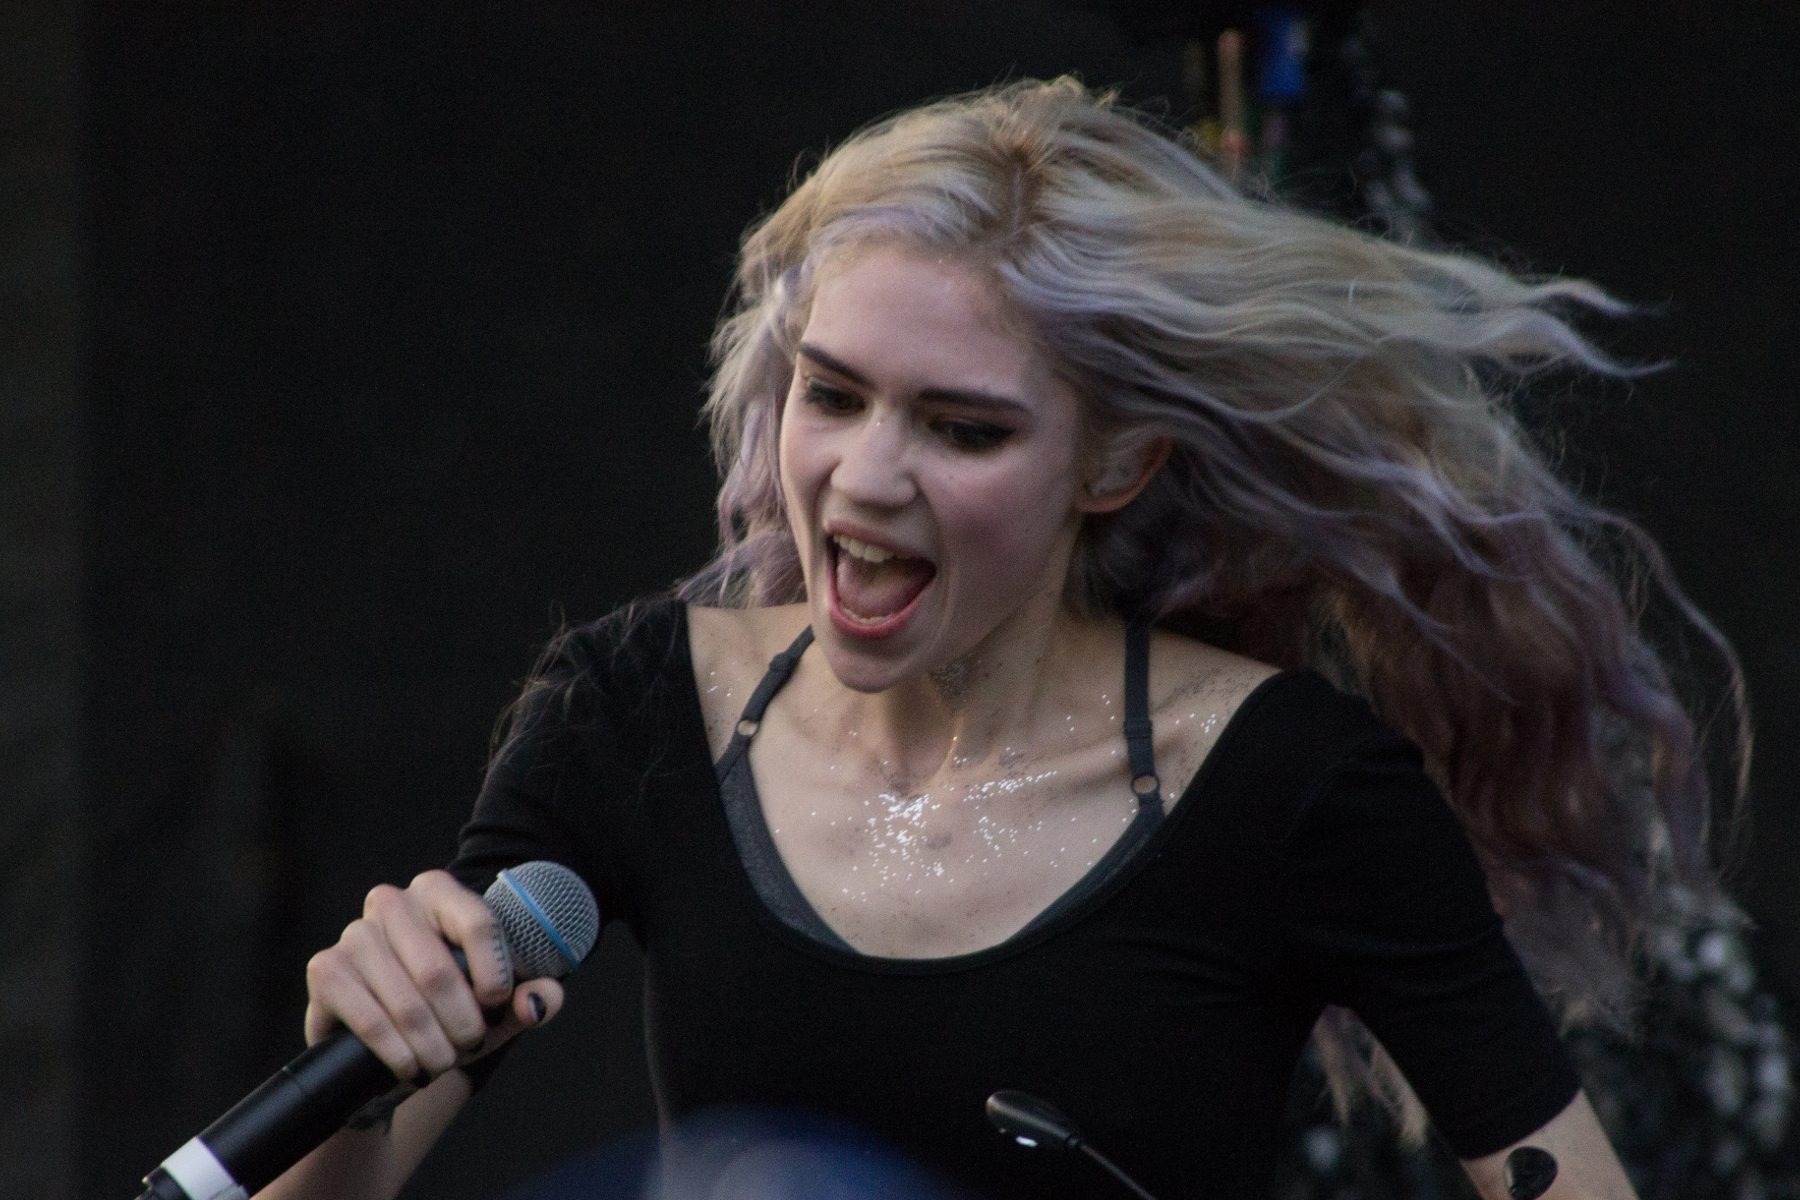 Grimes Teases Fans with Preview of New Song “I Wanna Be Software”